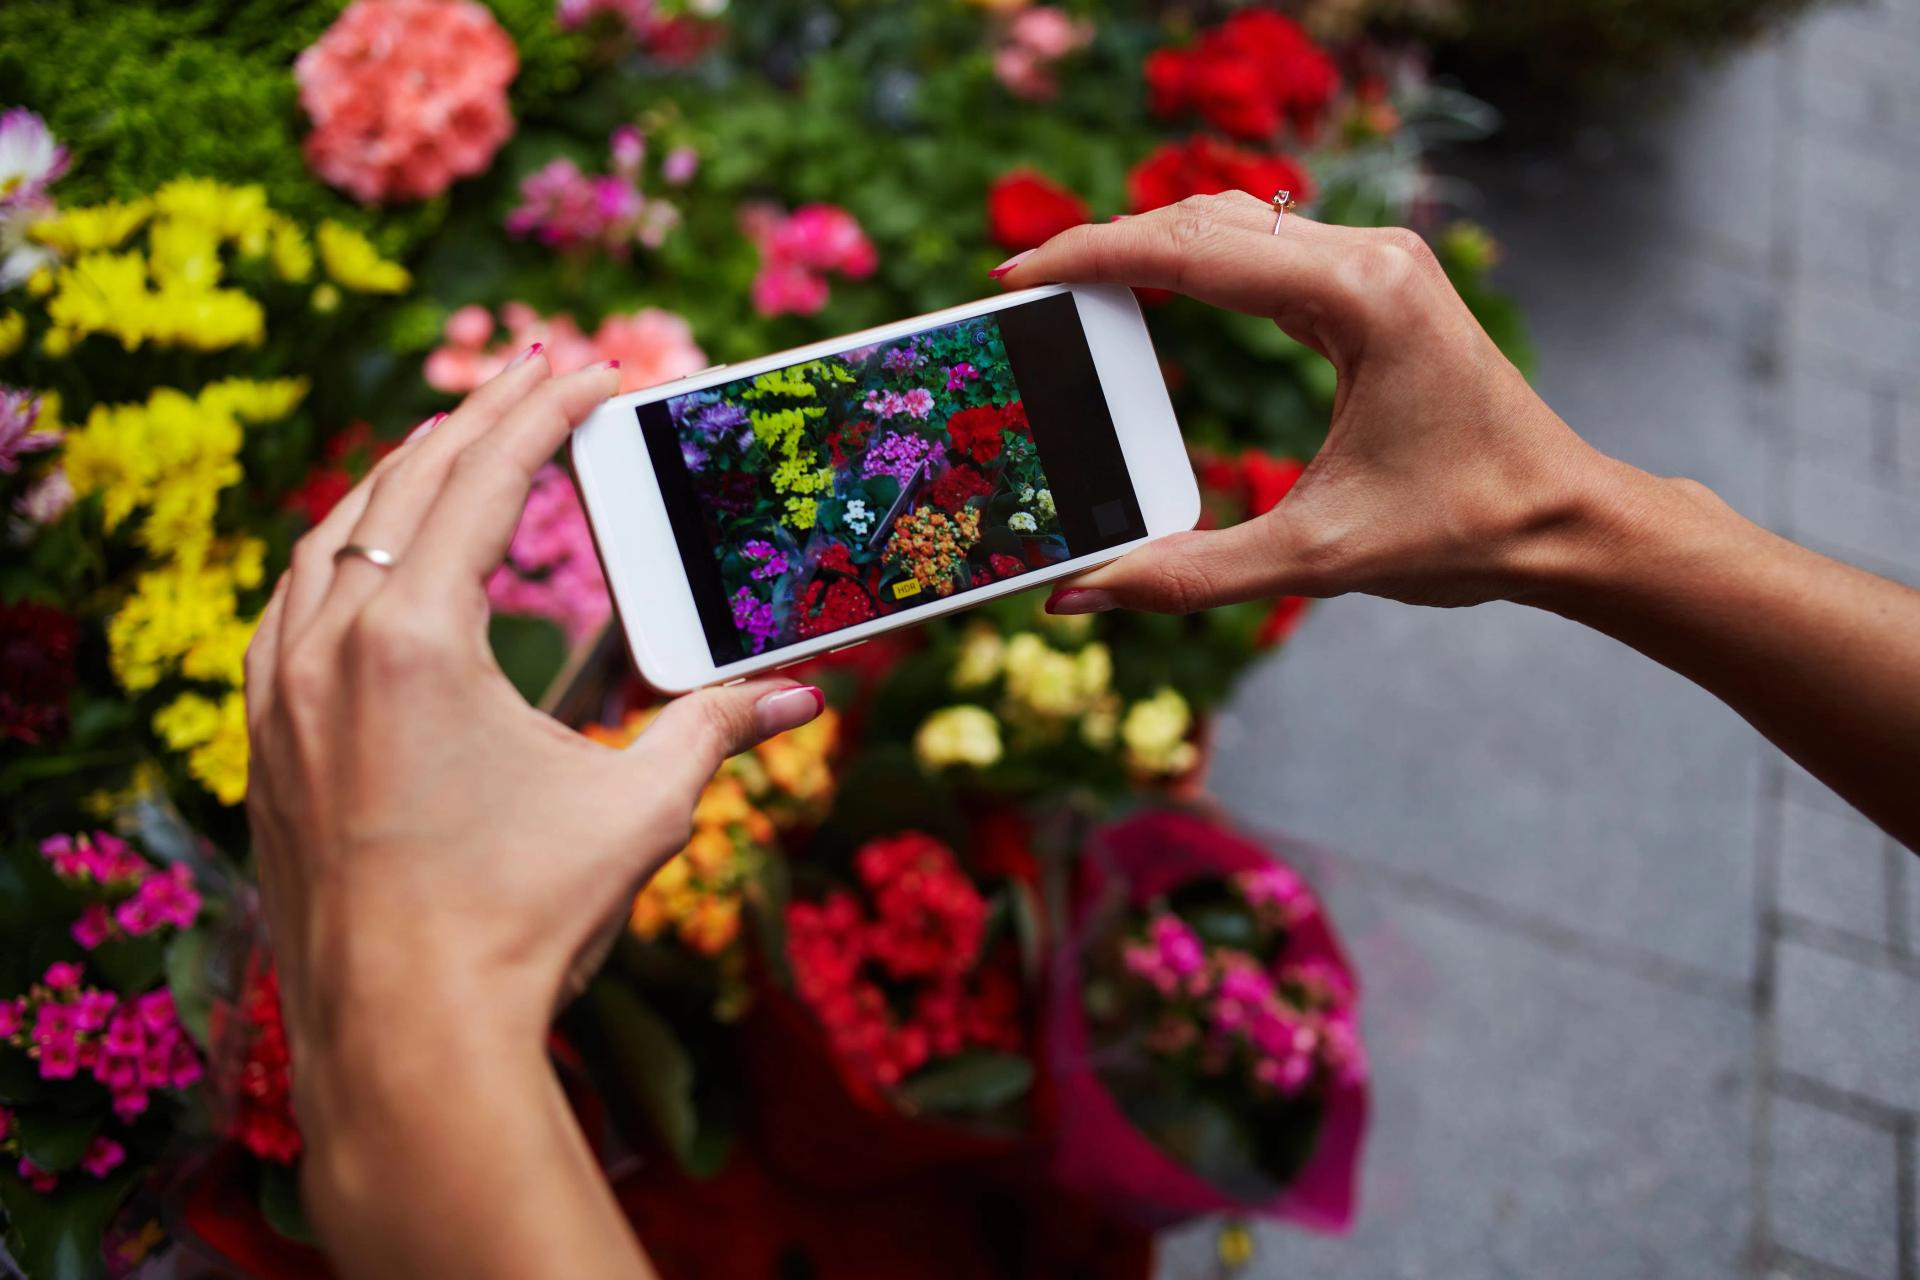 Photographing your garden for Instagram